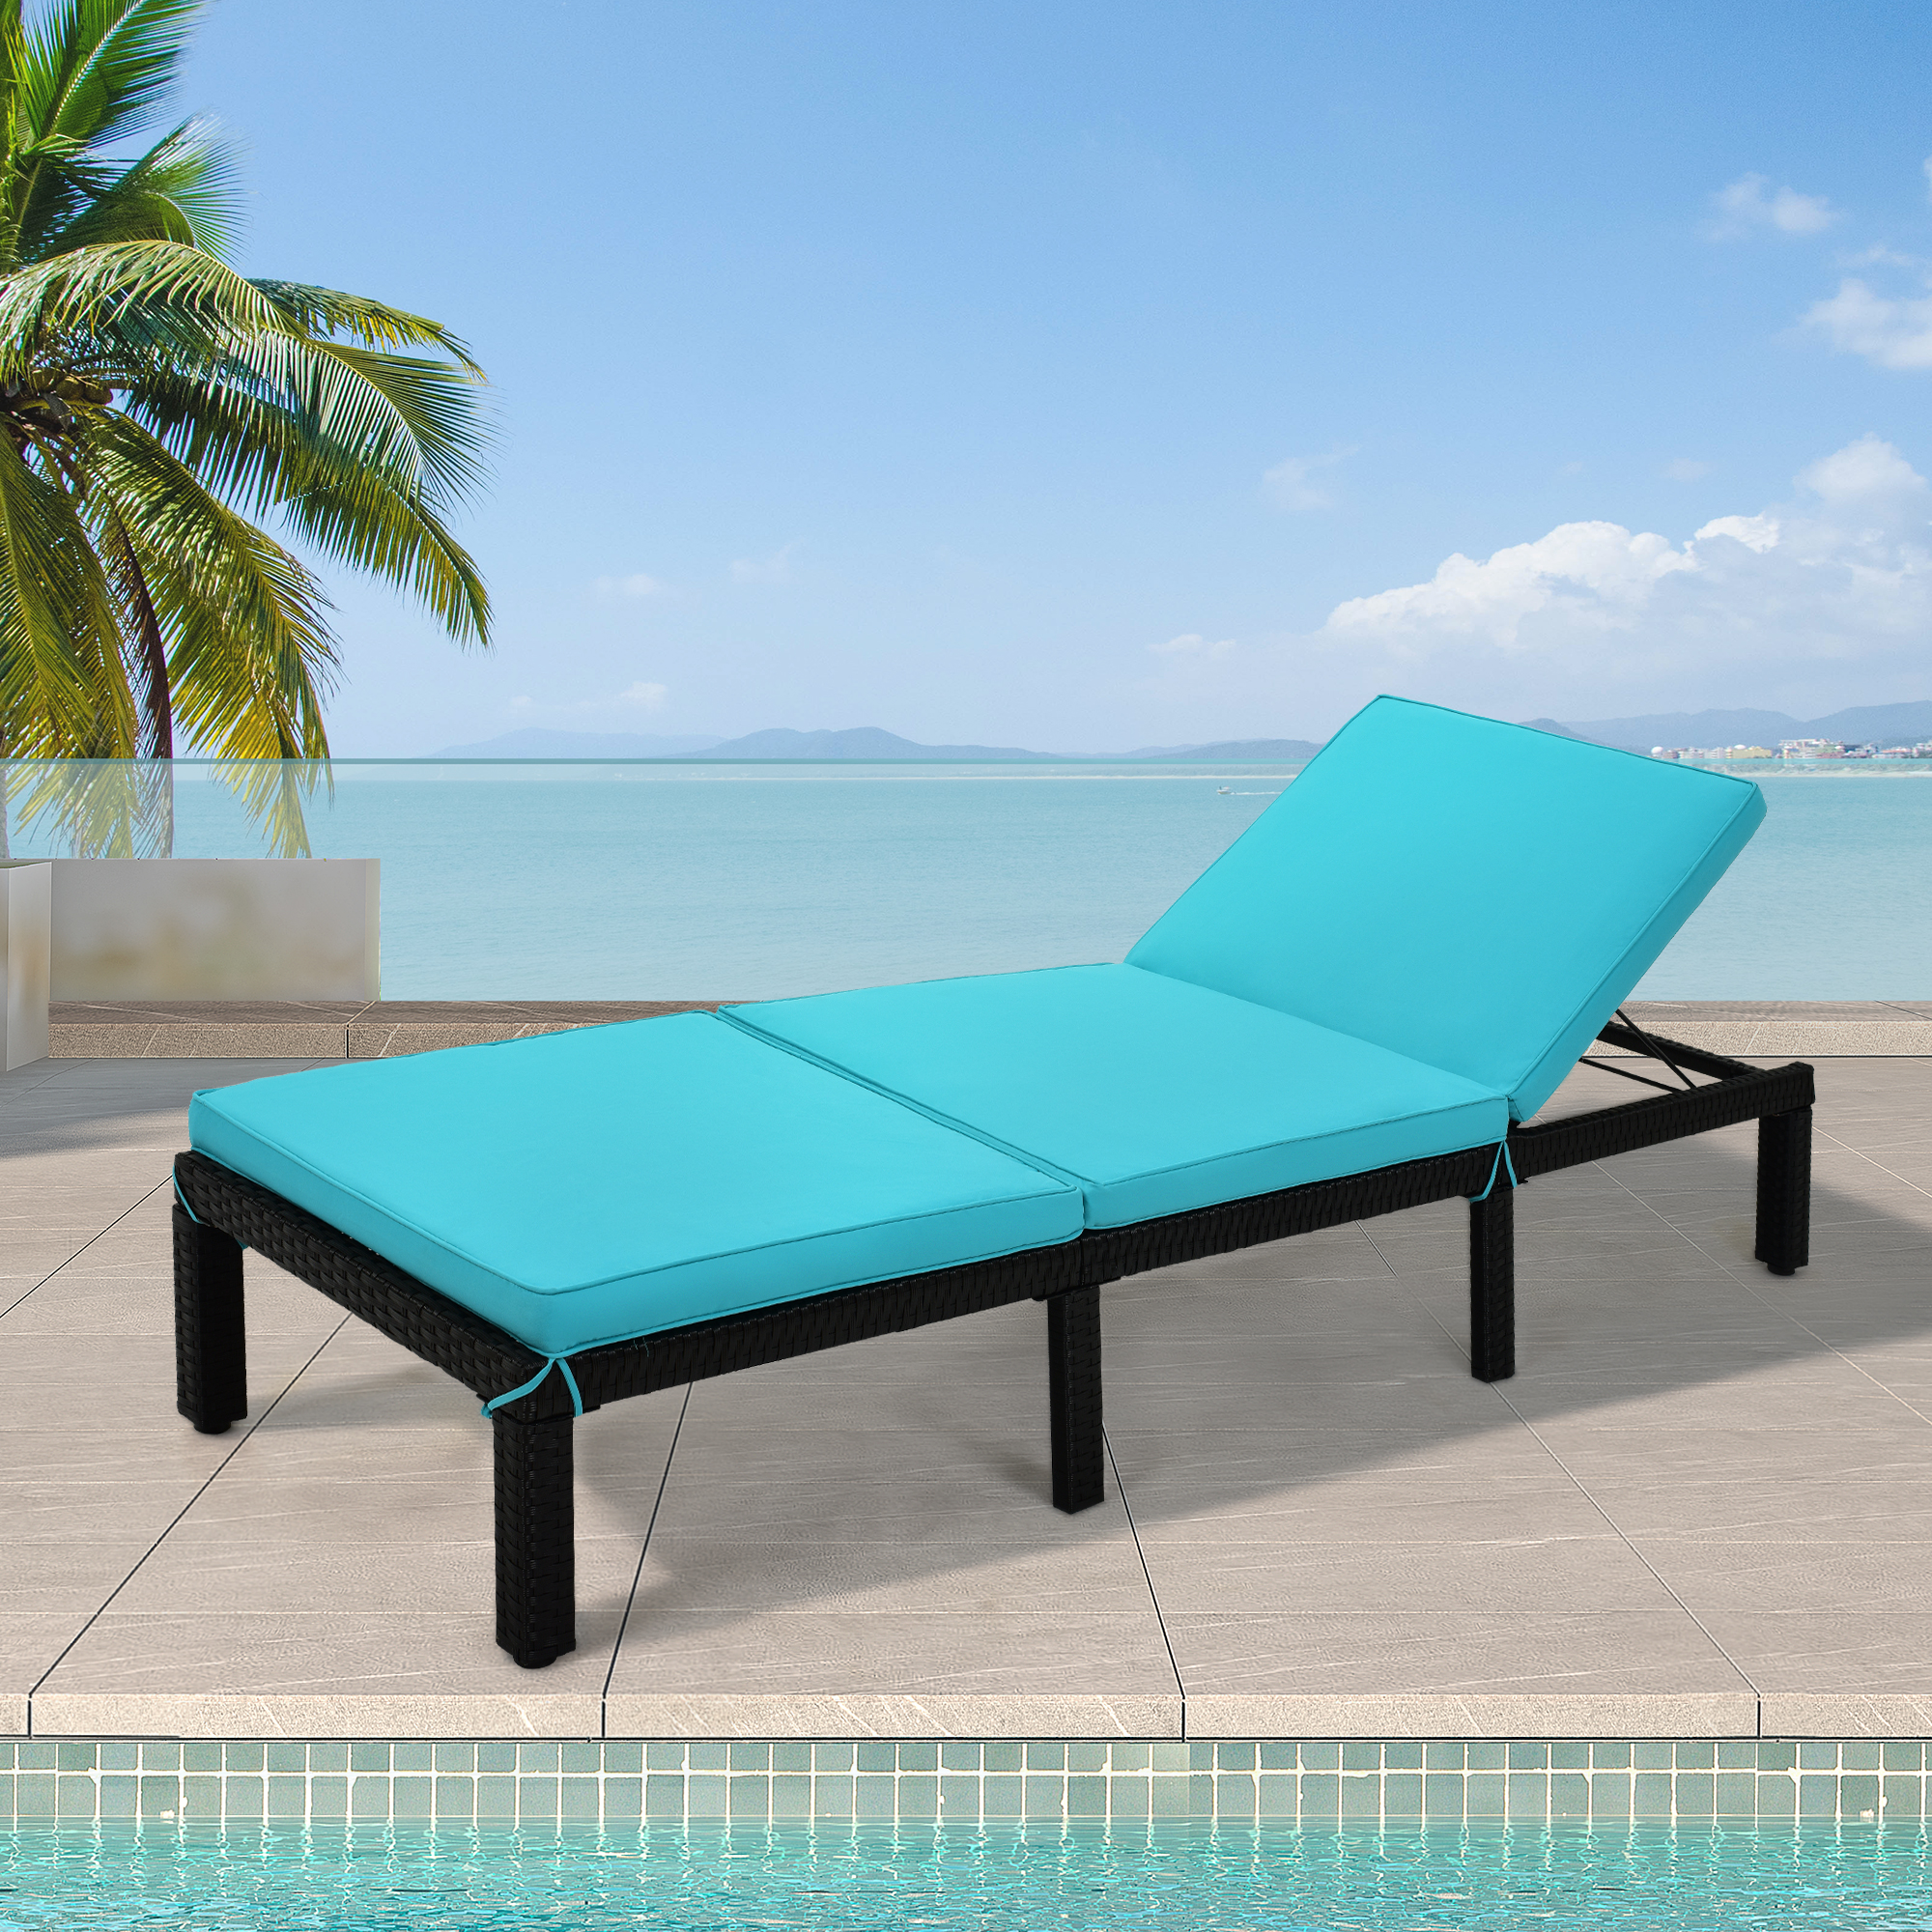 Rattan Wicker Chaise Lounge Chair, Outdoor Patio Lounger Recliner Chair w/Adjustable Backrest, Heavy-Duty Reclining Chair Sunbed with Blue Cushion for Garden Yard Patio - image 3 of 8